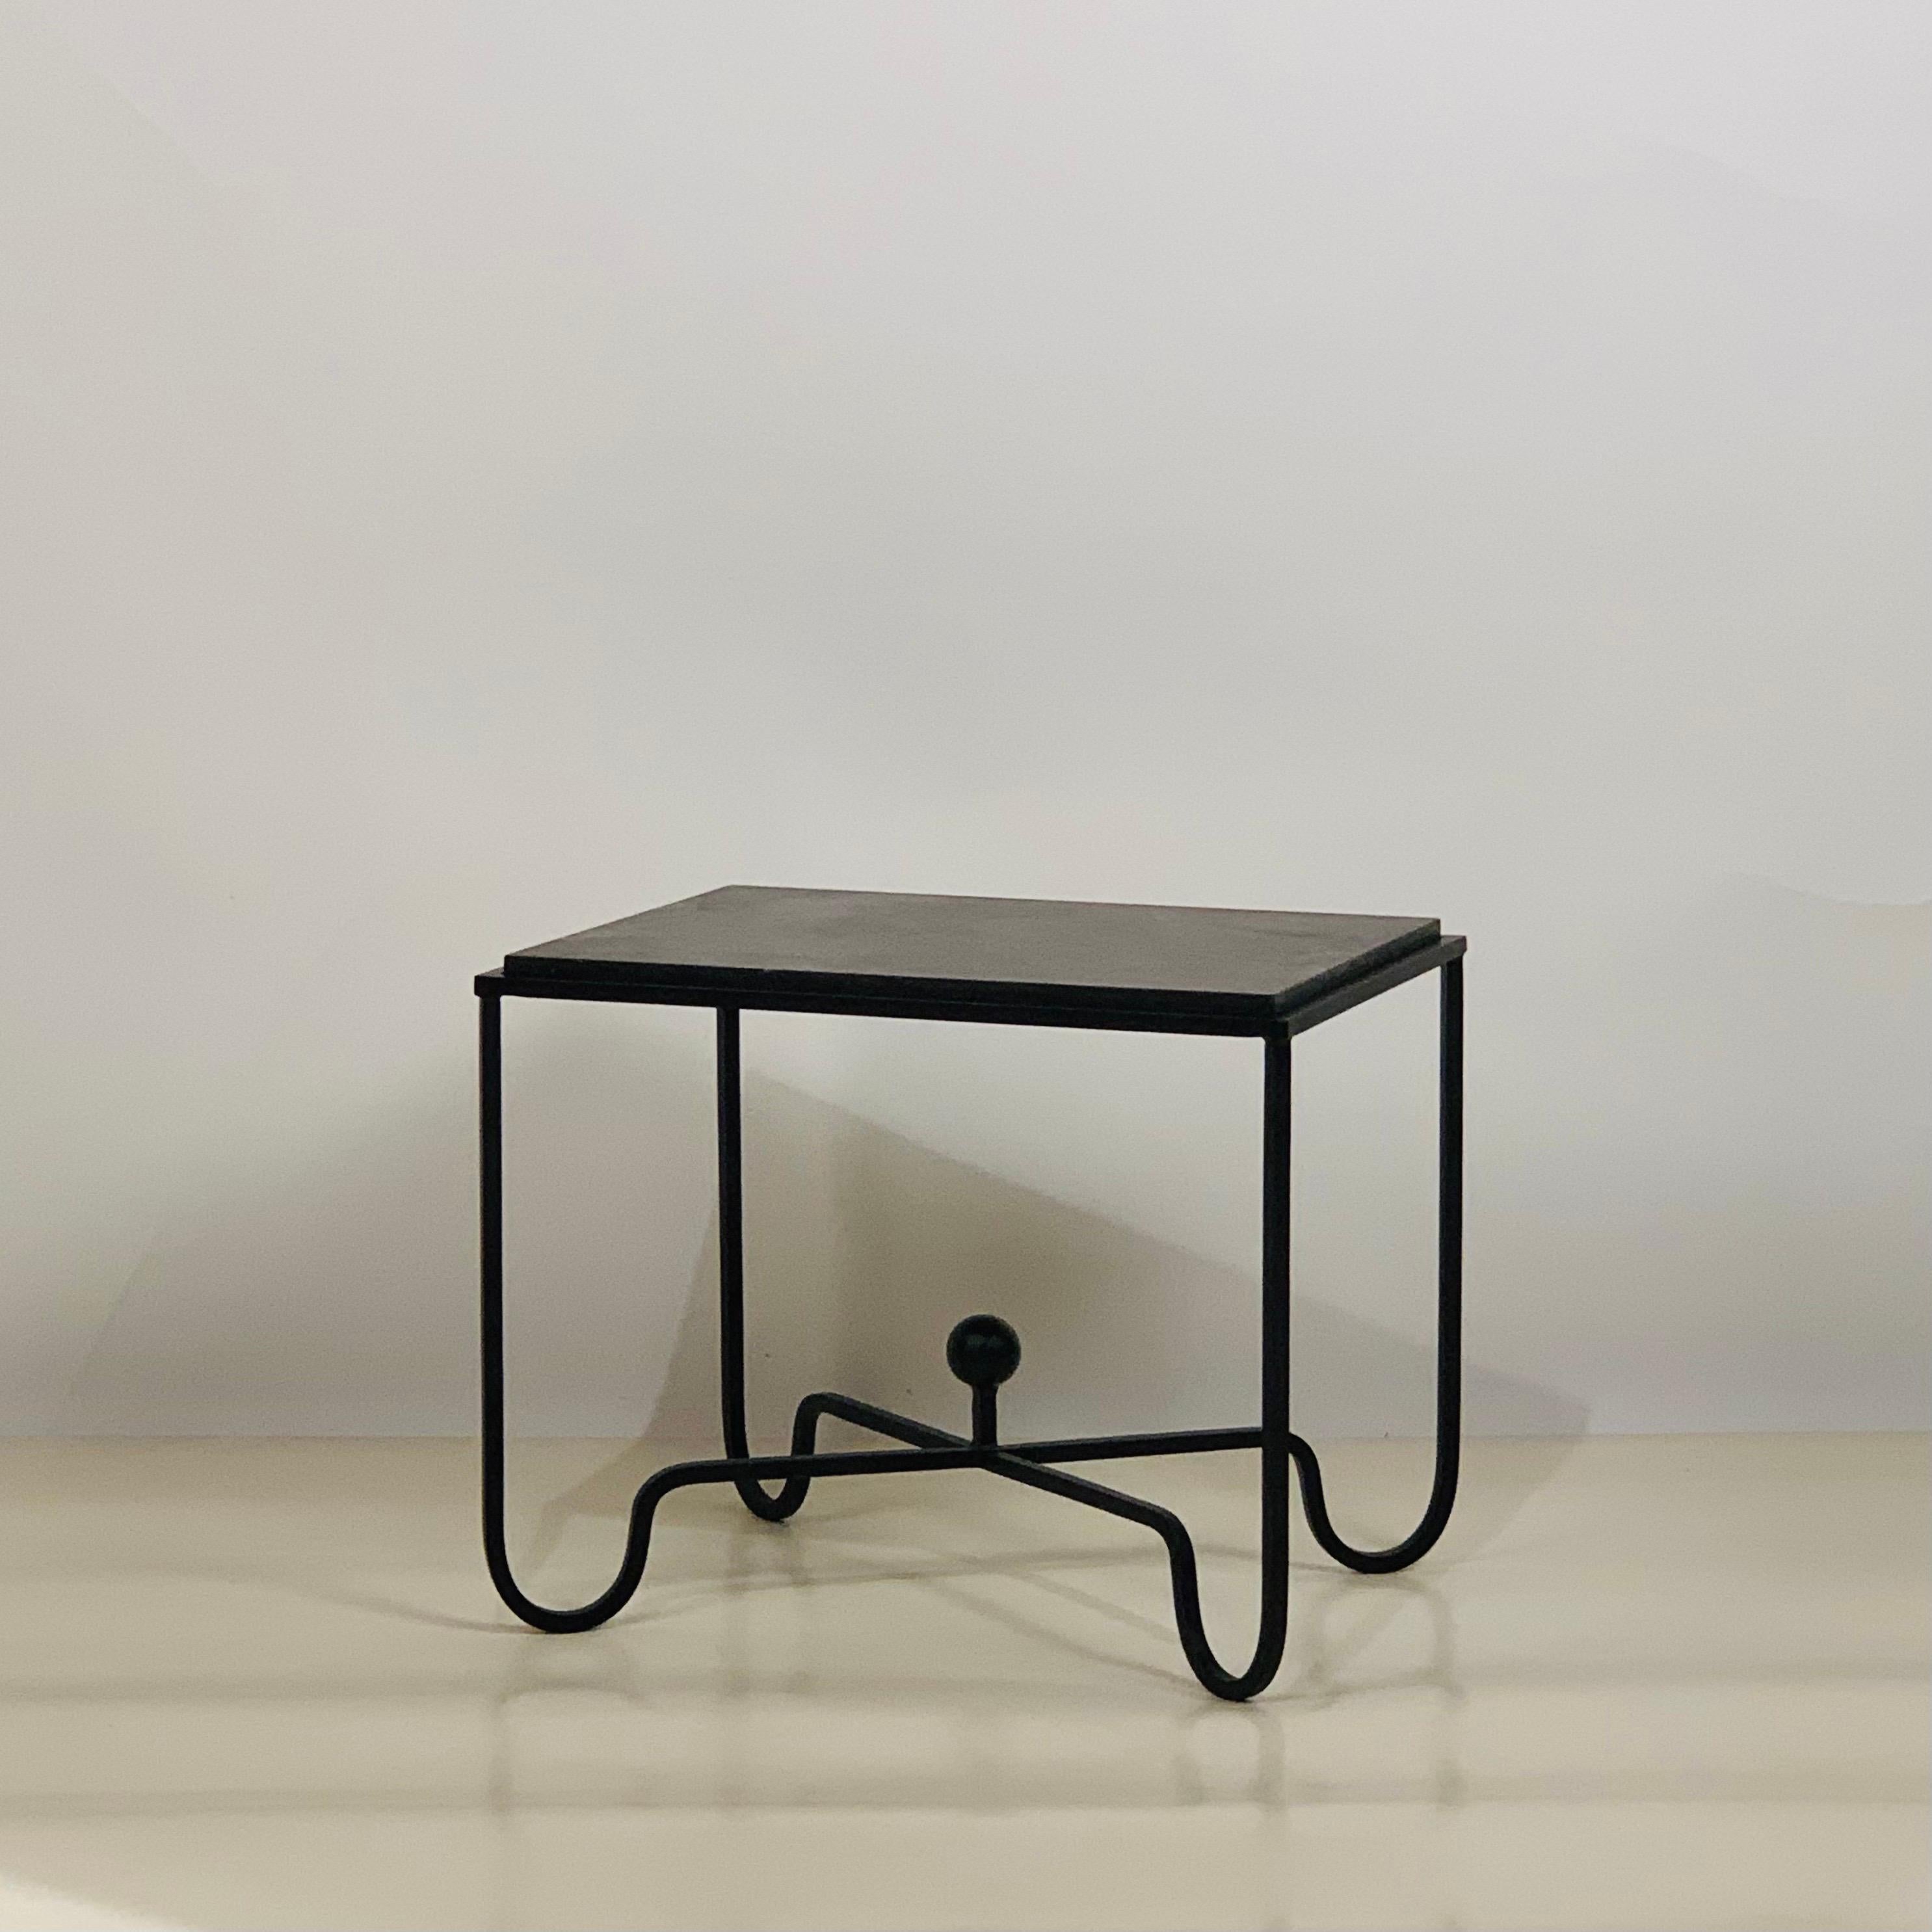 Iron and black limestone 'Entretoise' side table by Design Frères.